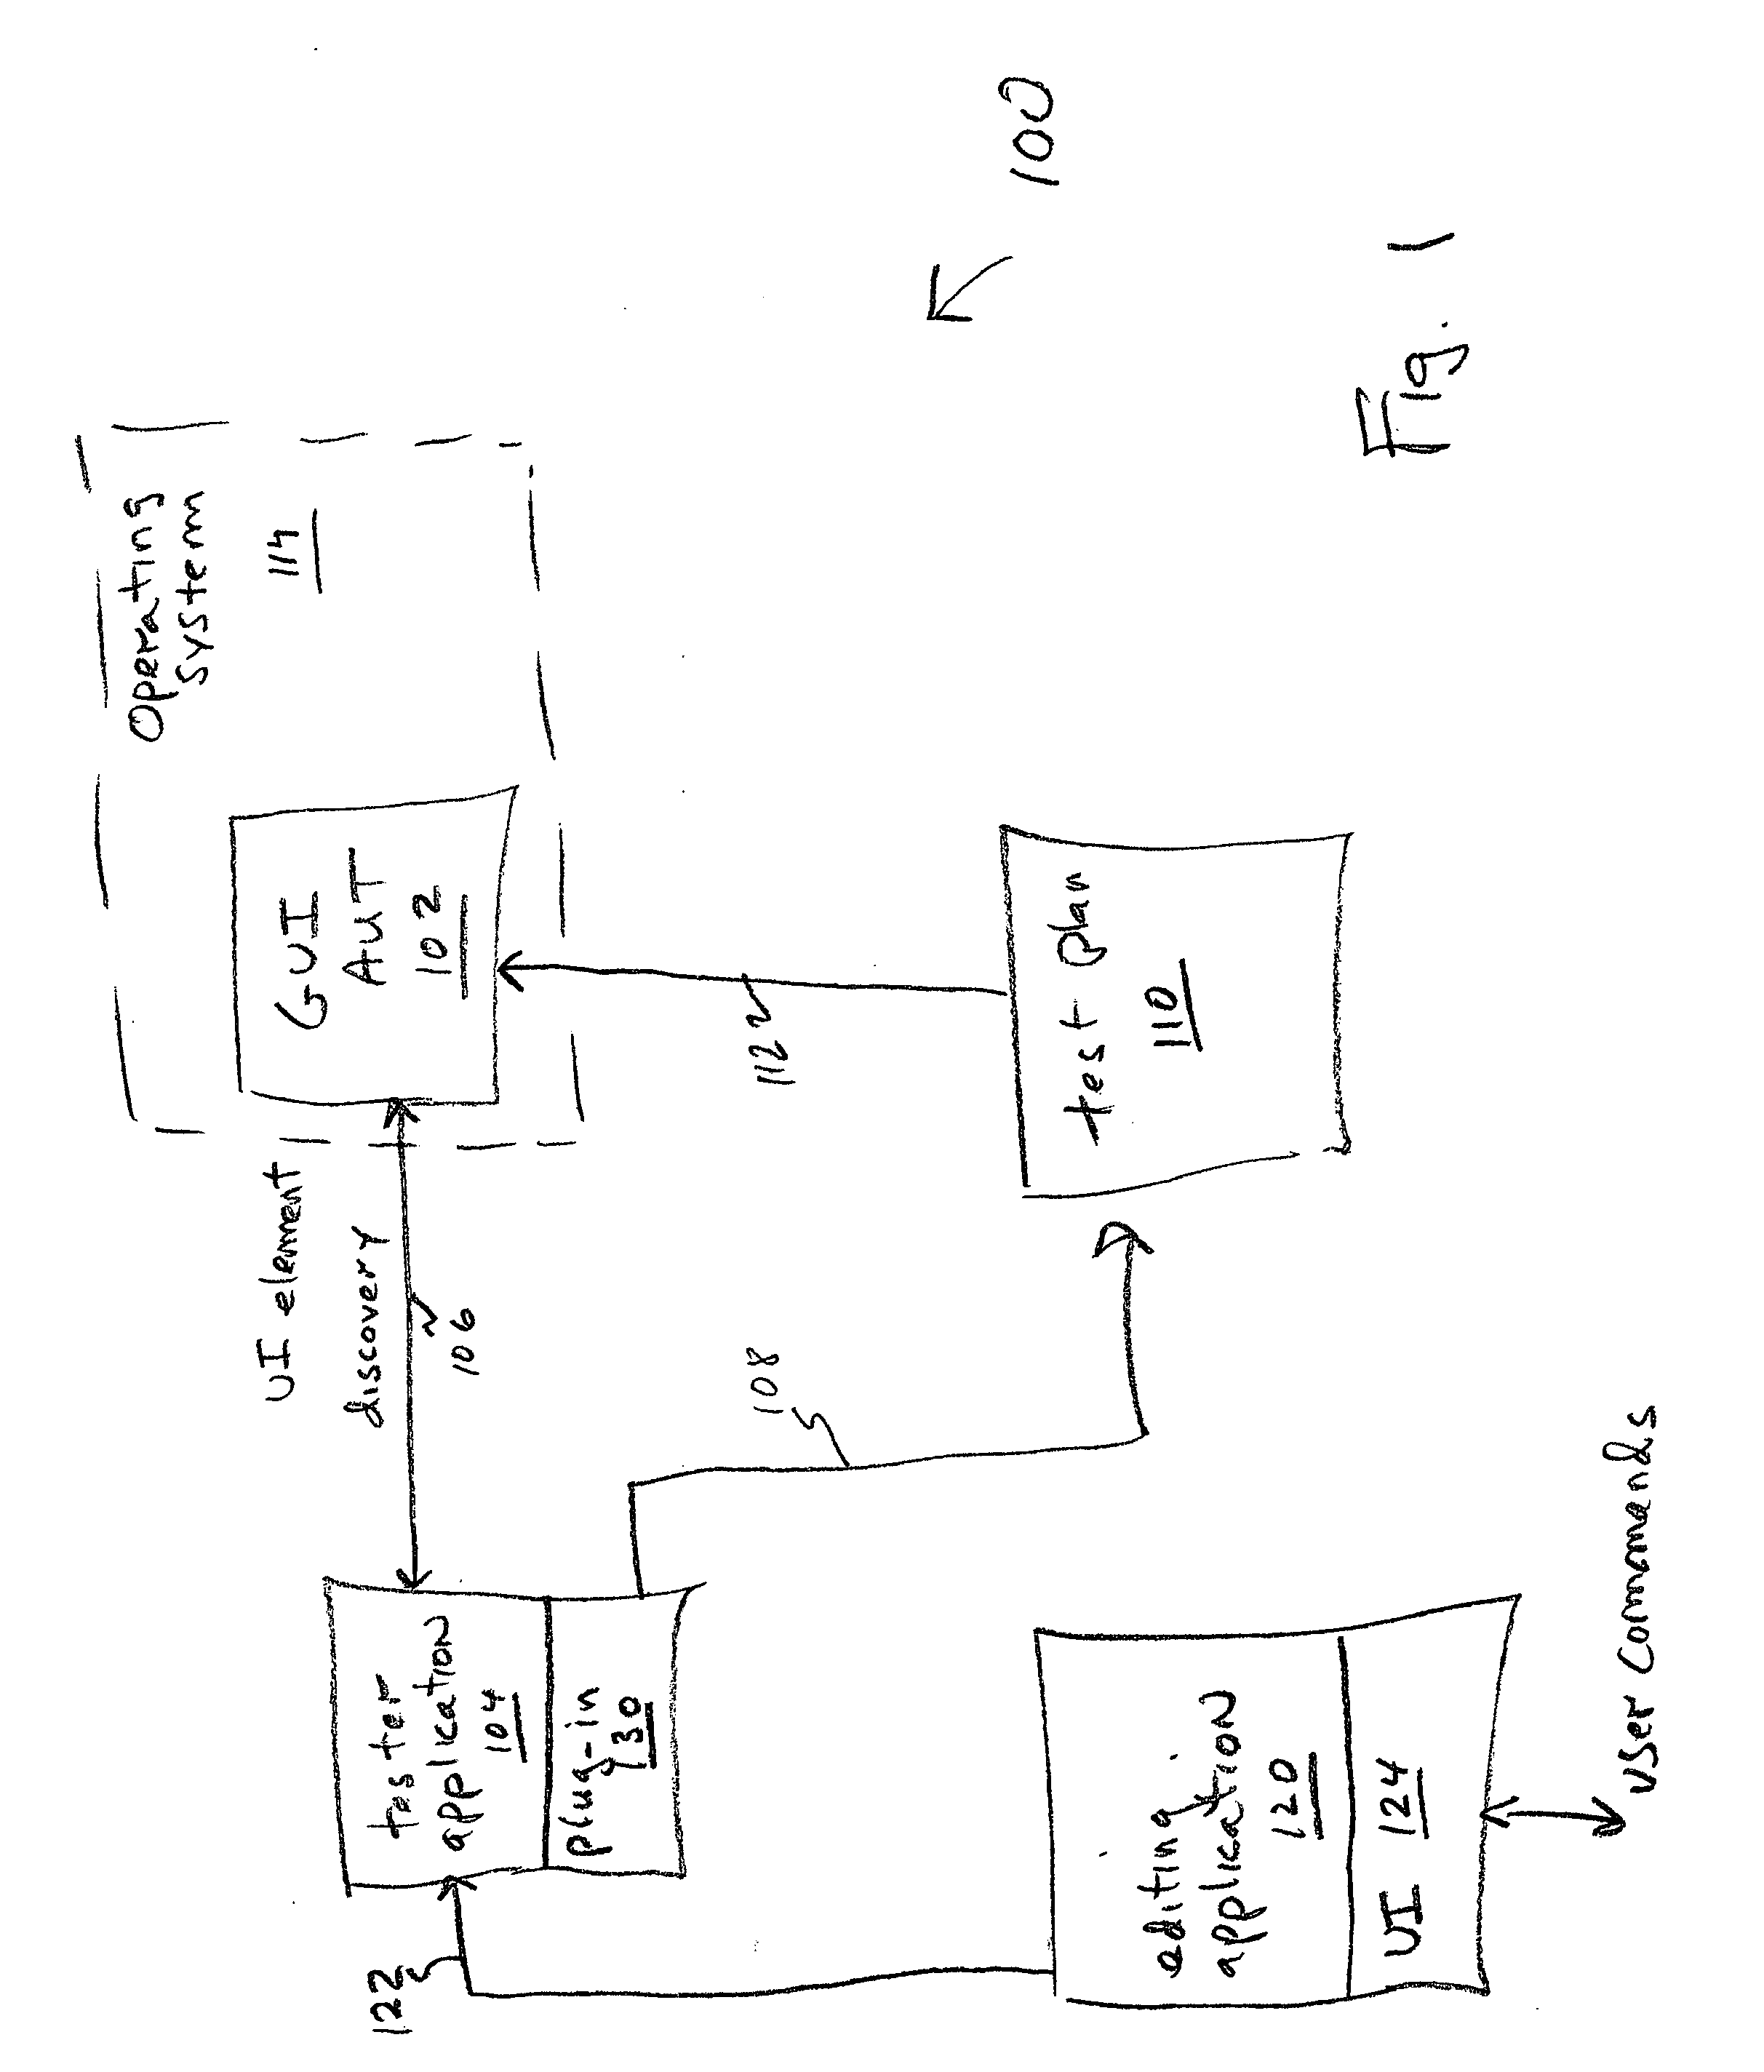 System and method for generating automatic test plans